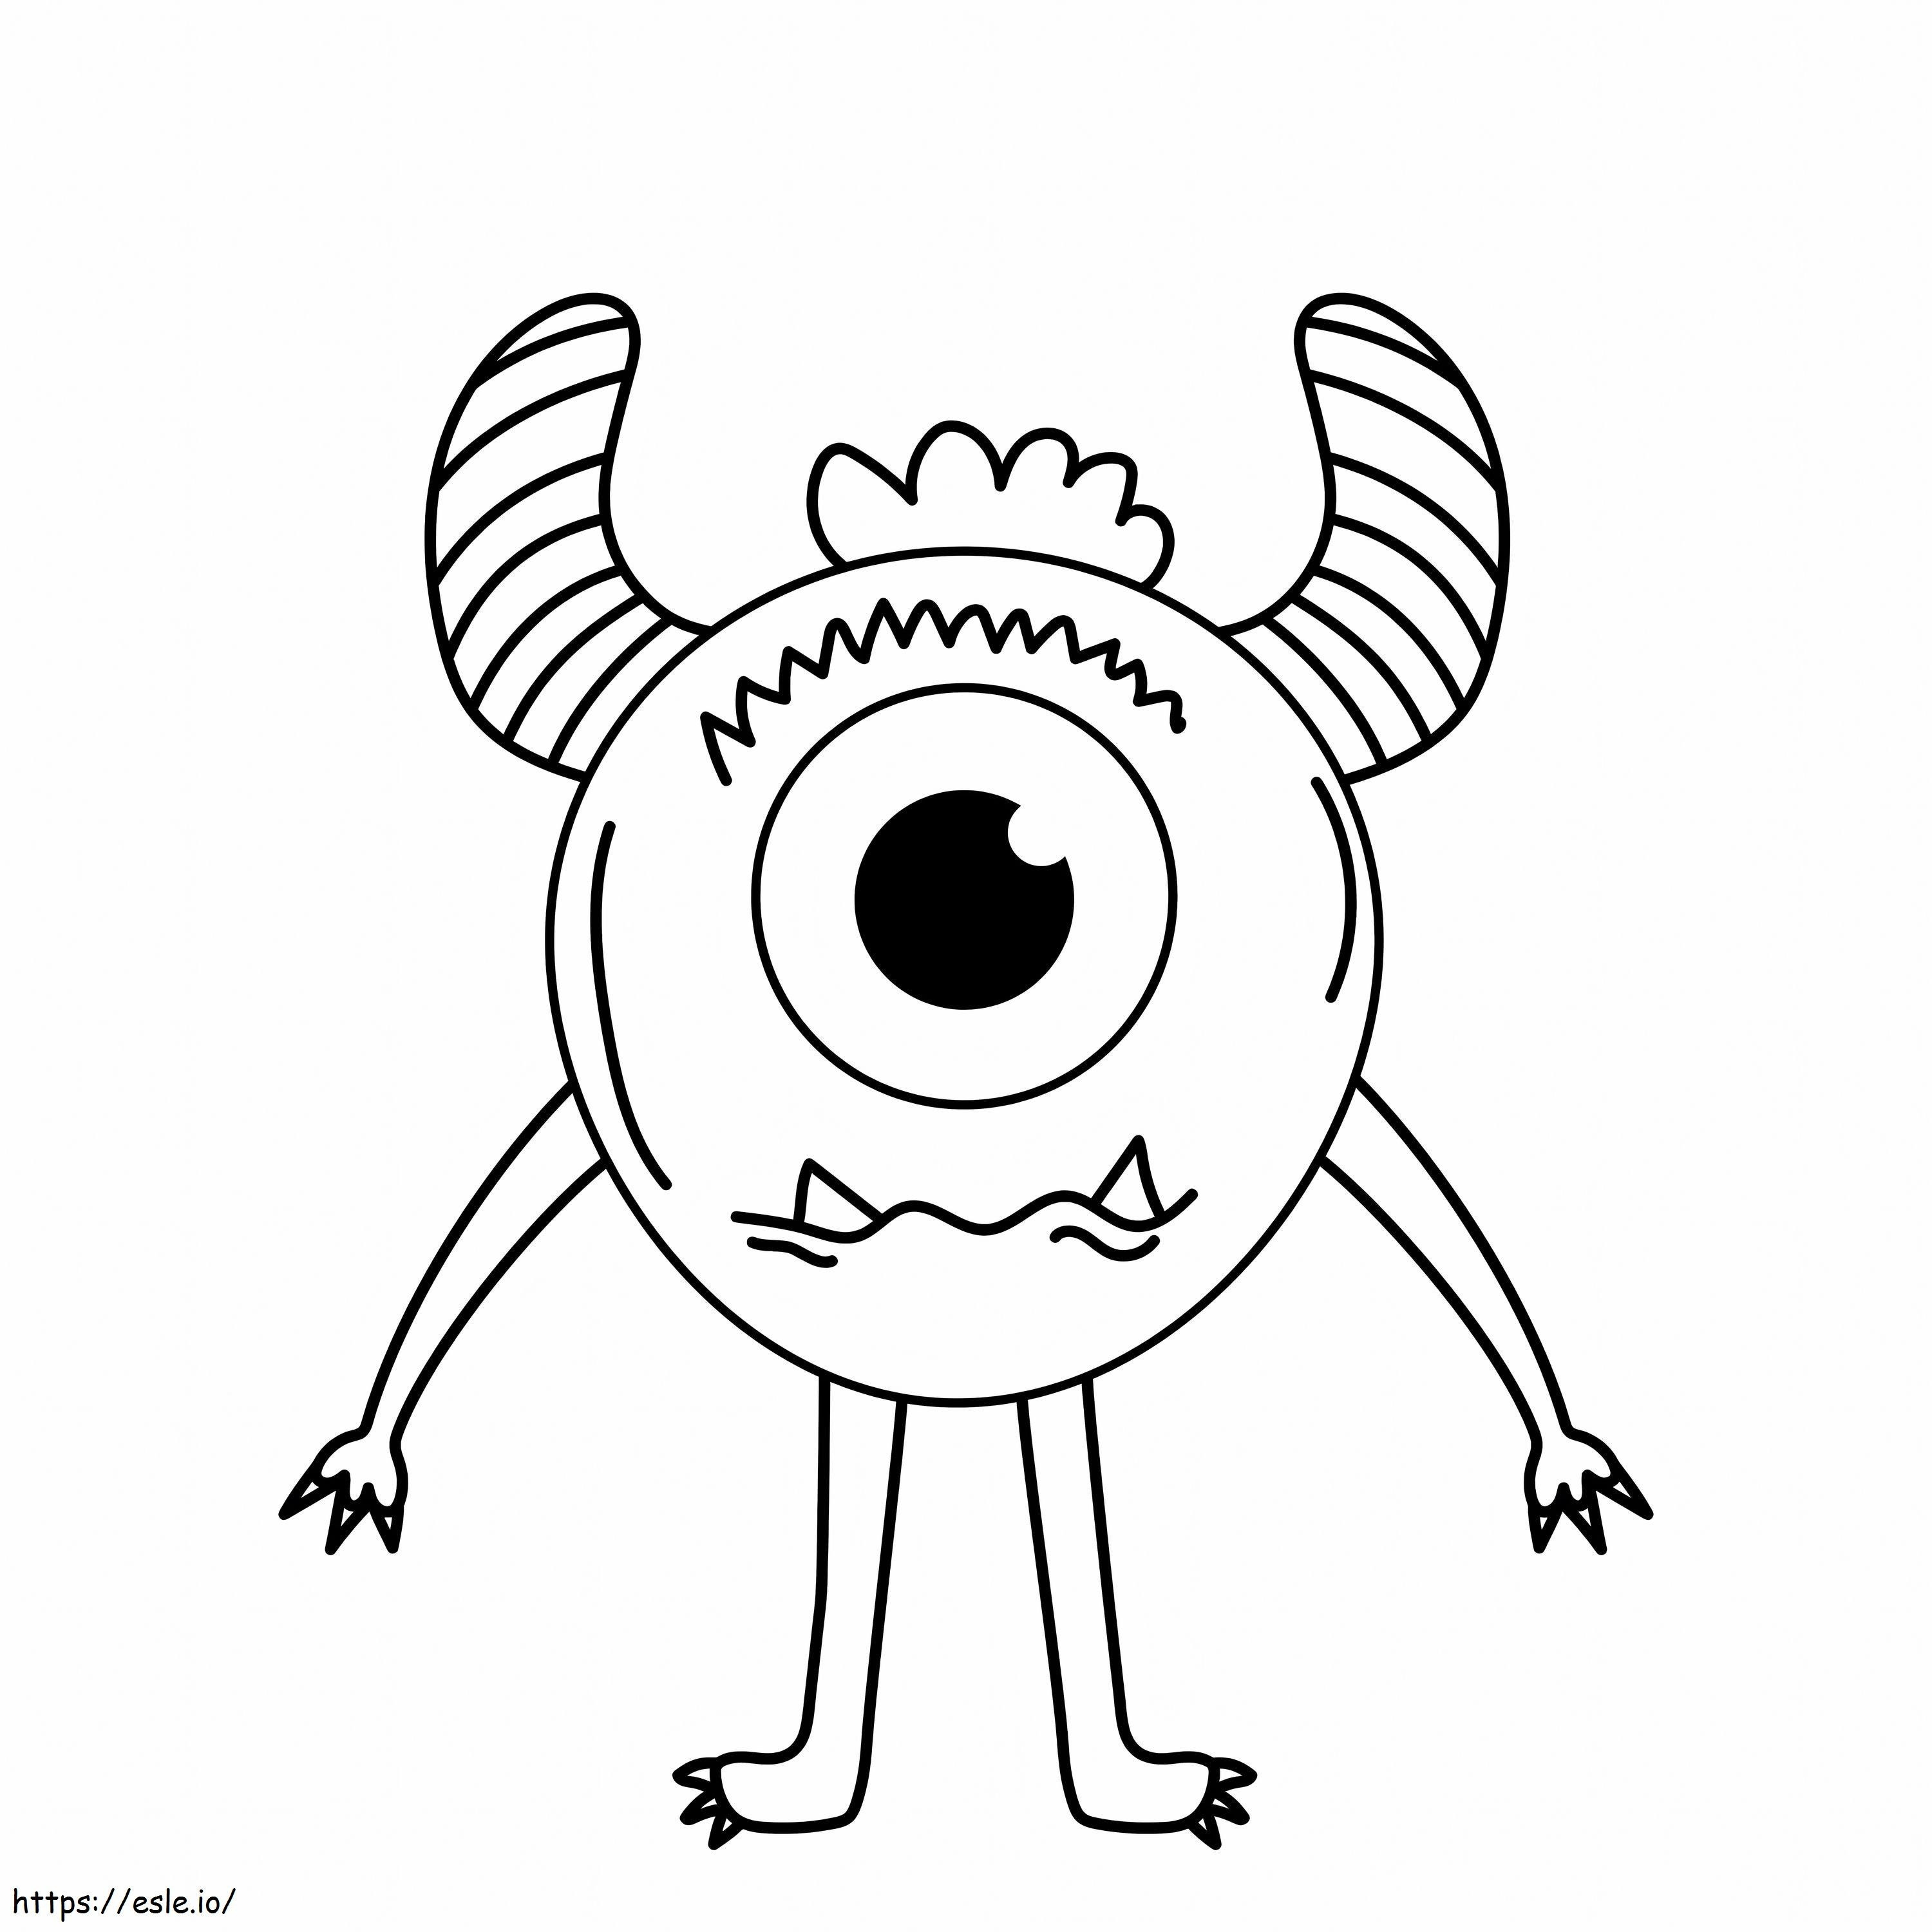 Cute Monster With Big Eye coloring page